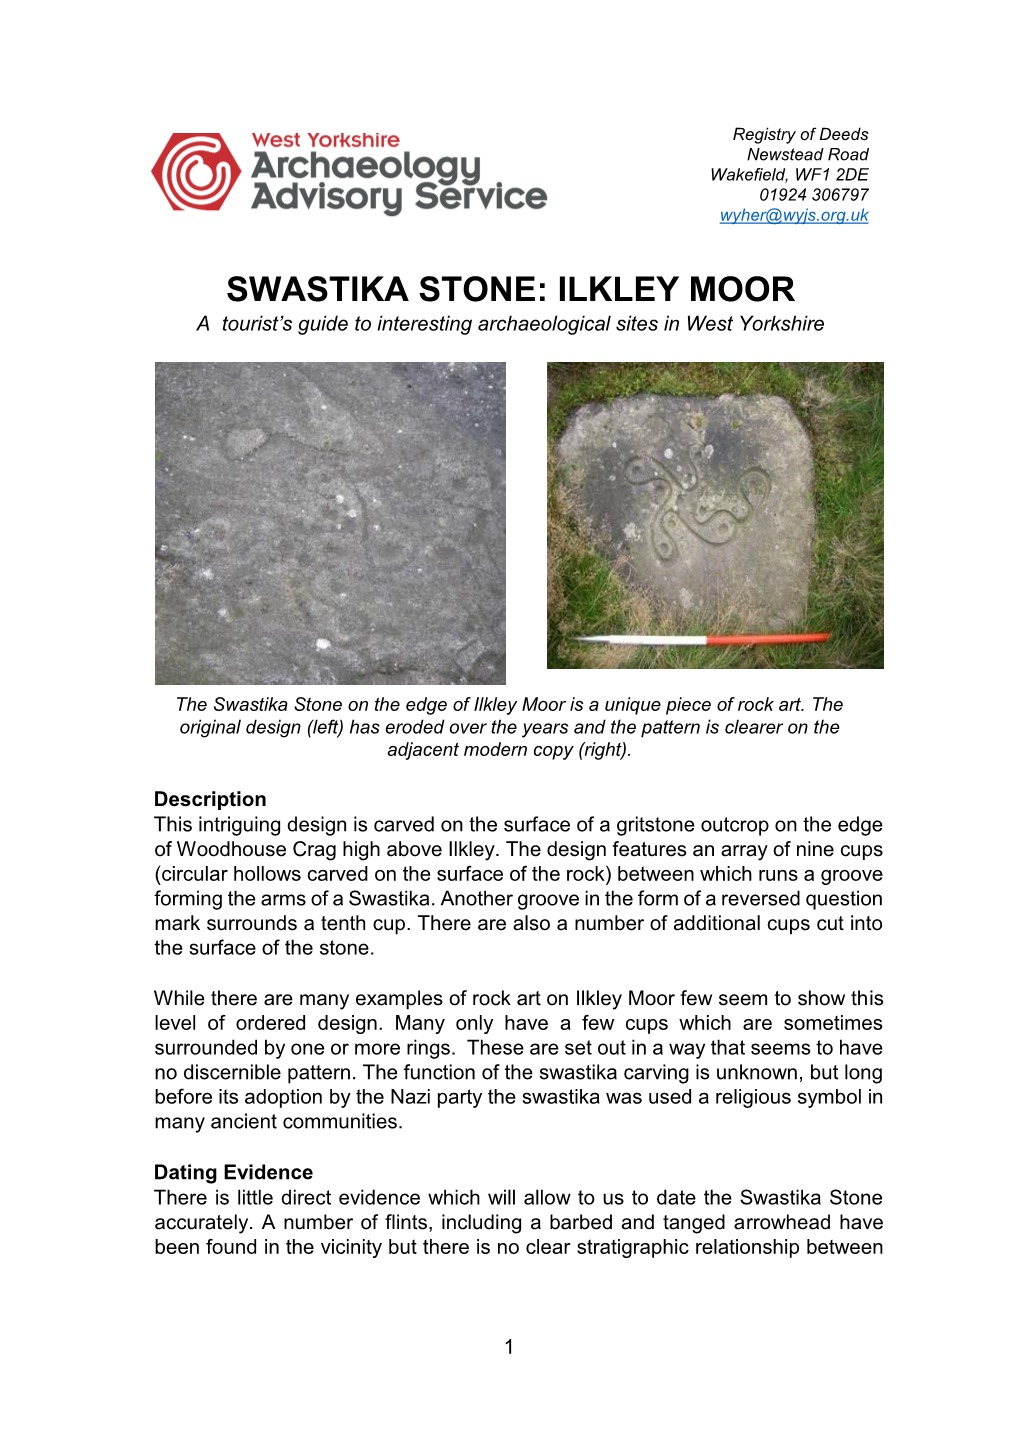 SWASTIKA STONE: ILKLEY MOOR a Tourist’S Guide to Interesting Archaeological Sites in West Yorkshire